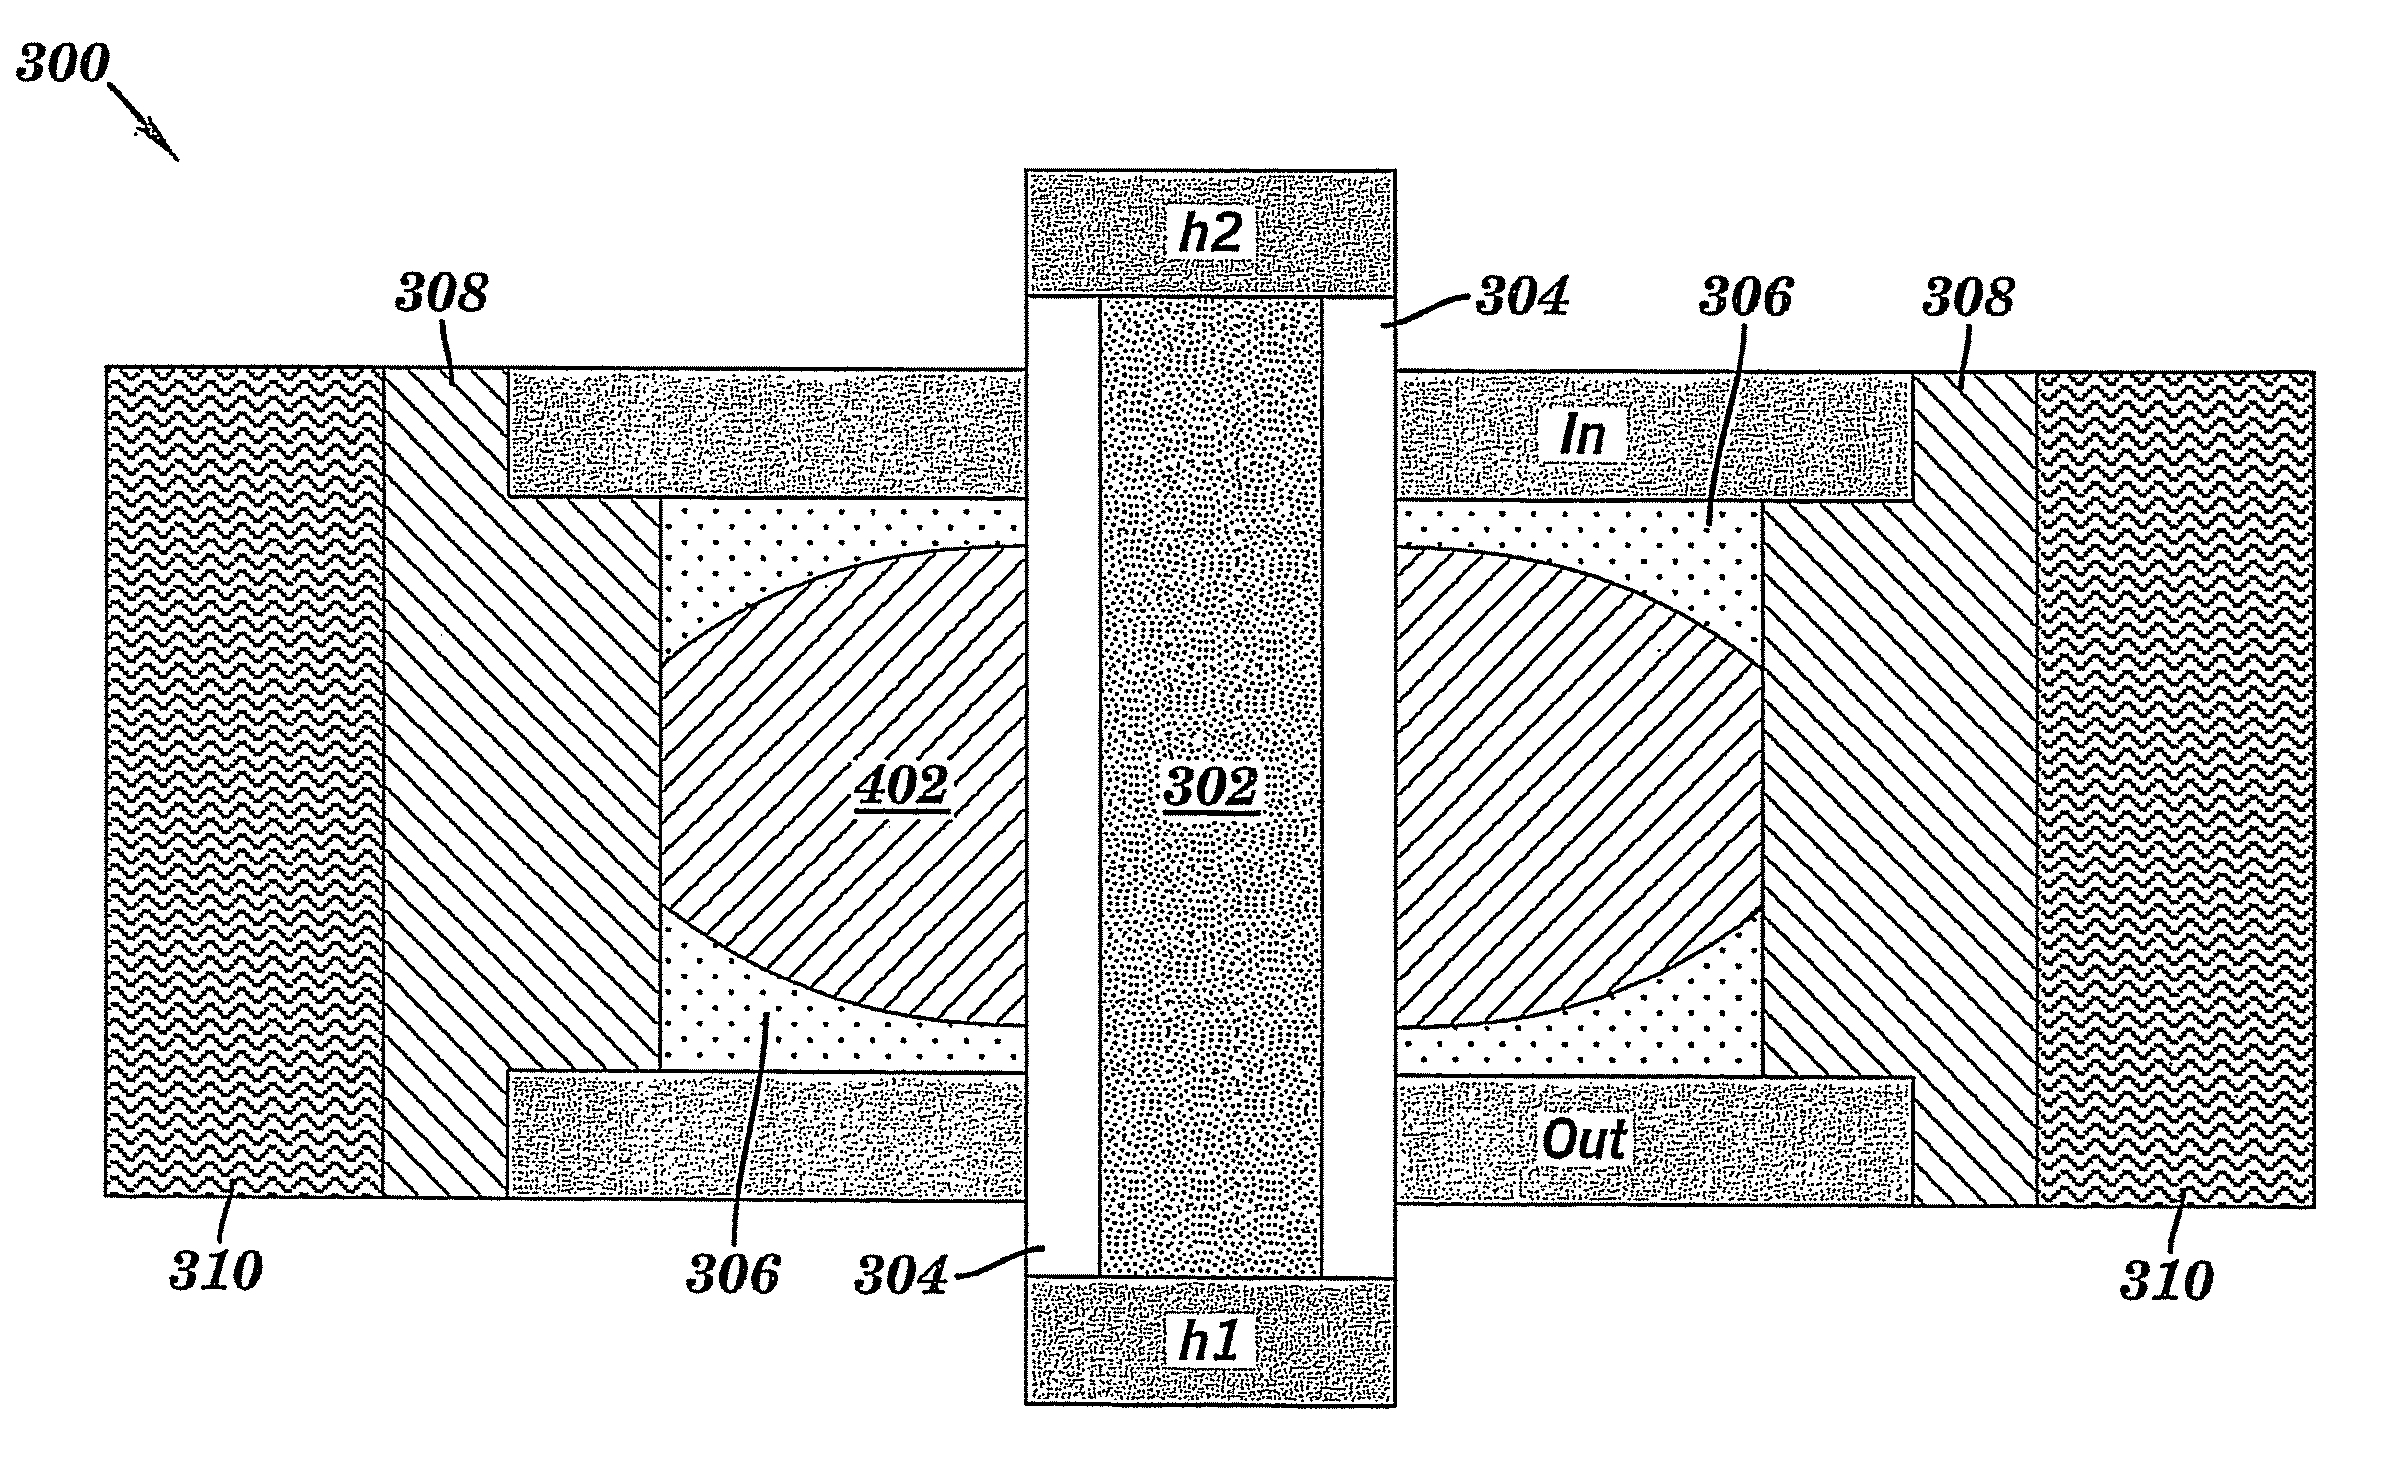 Heat-shielded low power PCM-based reprogrammable EFUSE device